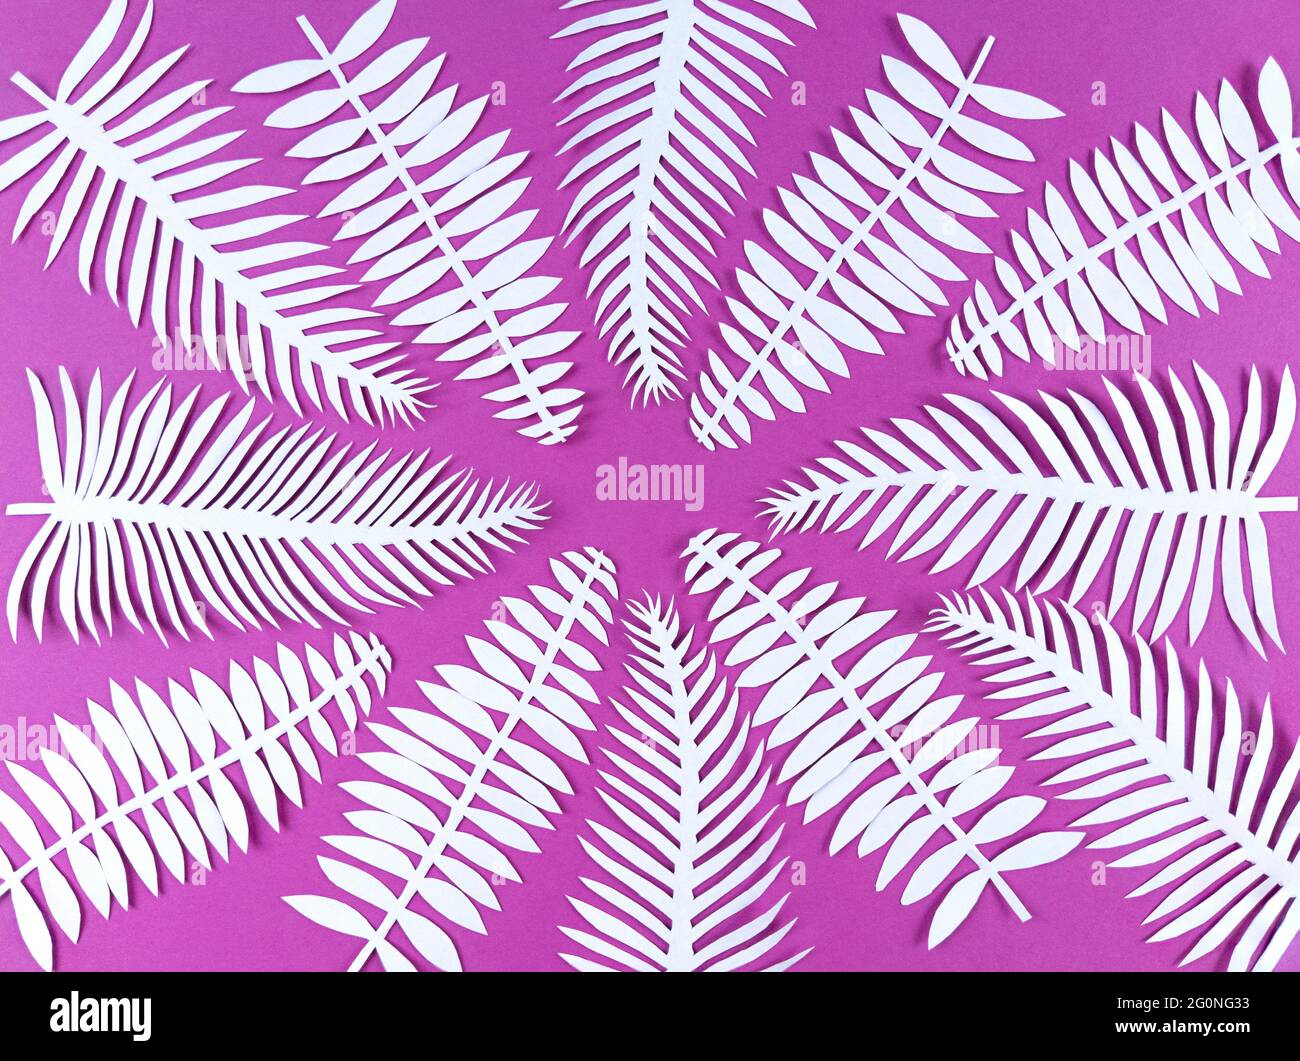 White paper cut leaves on pink background. Stock Photo